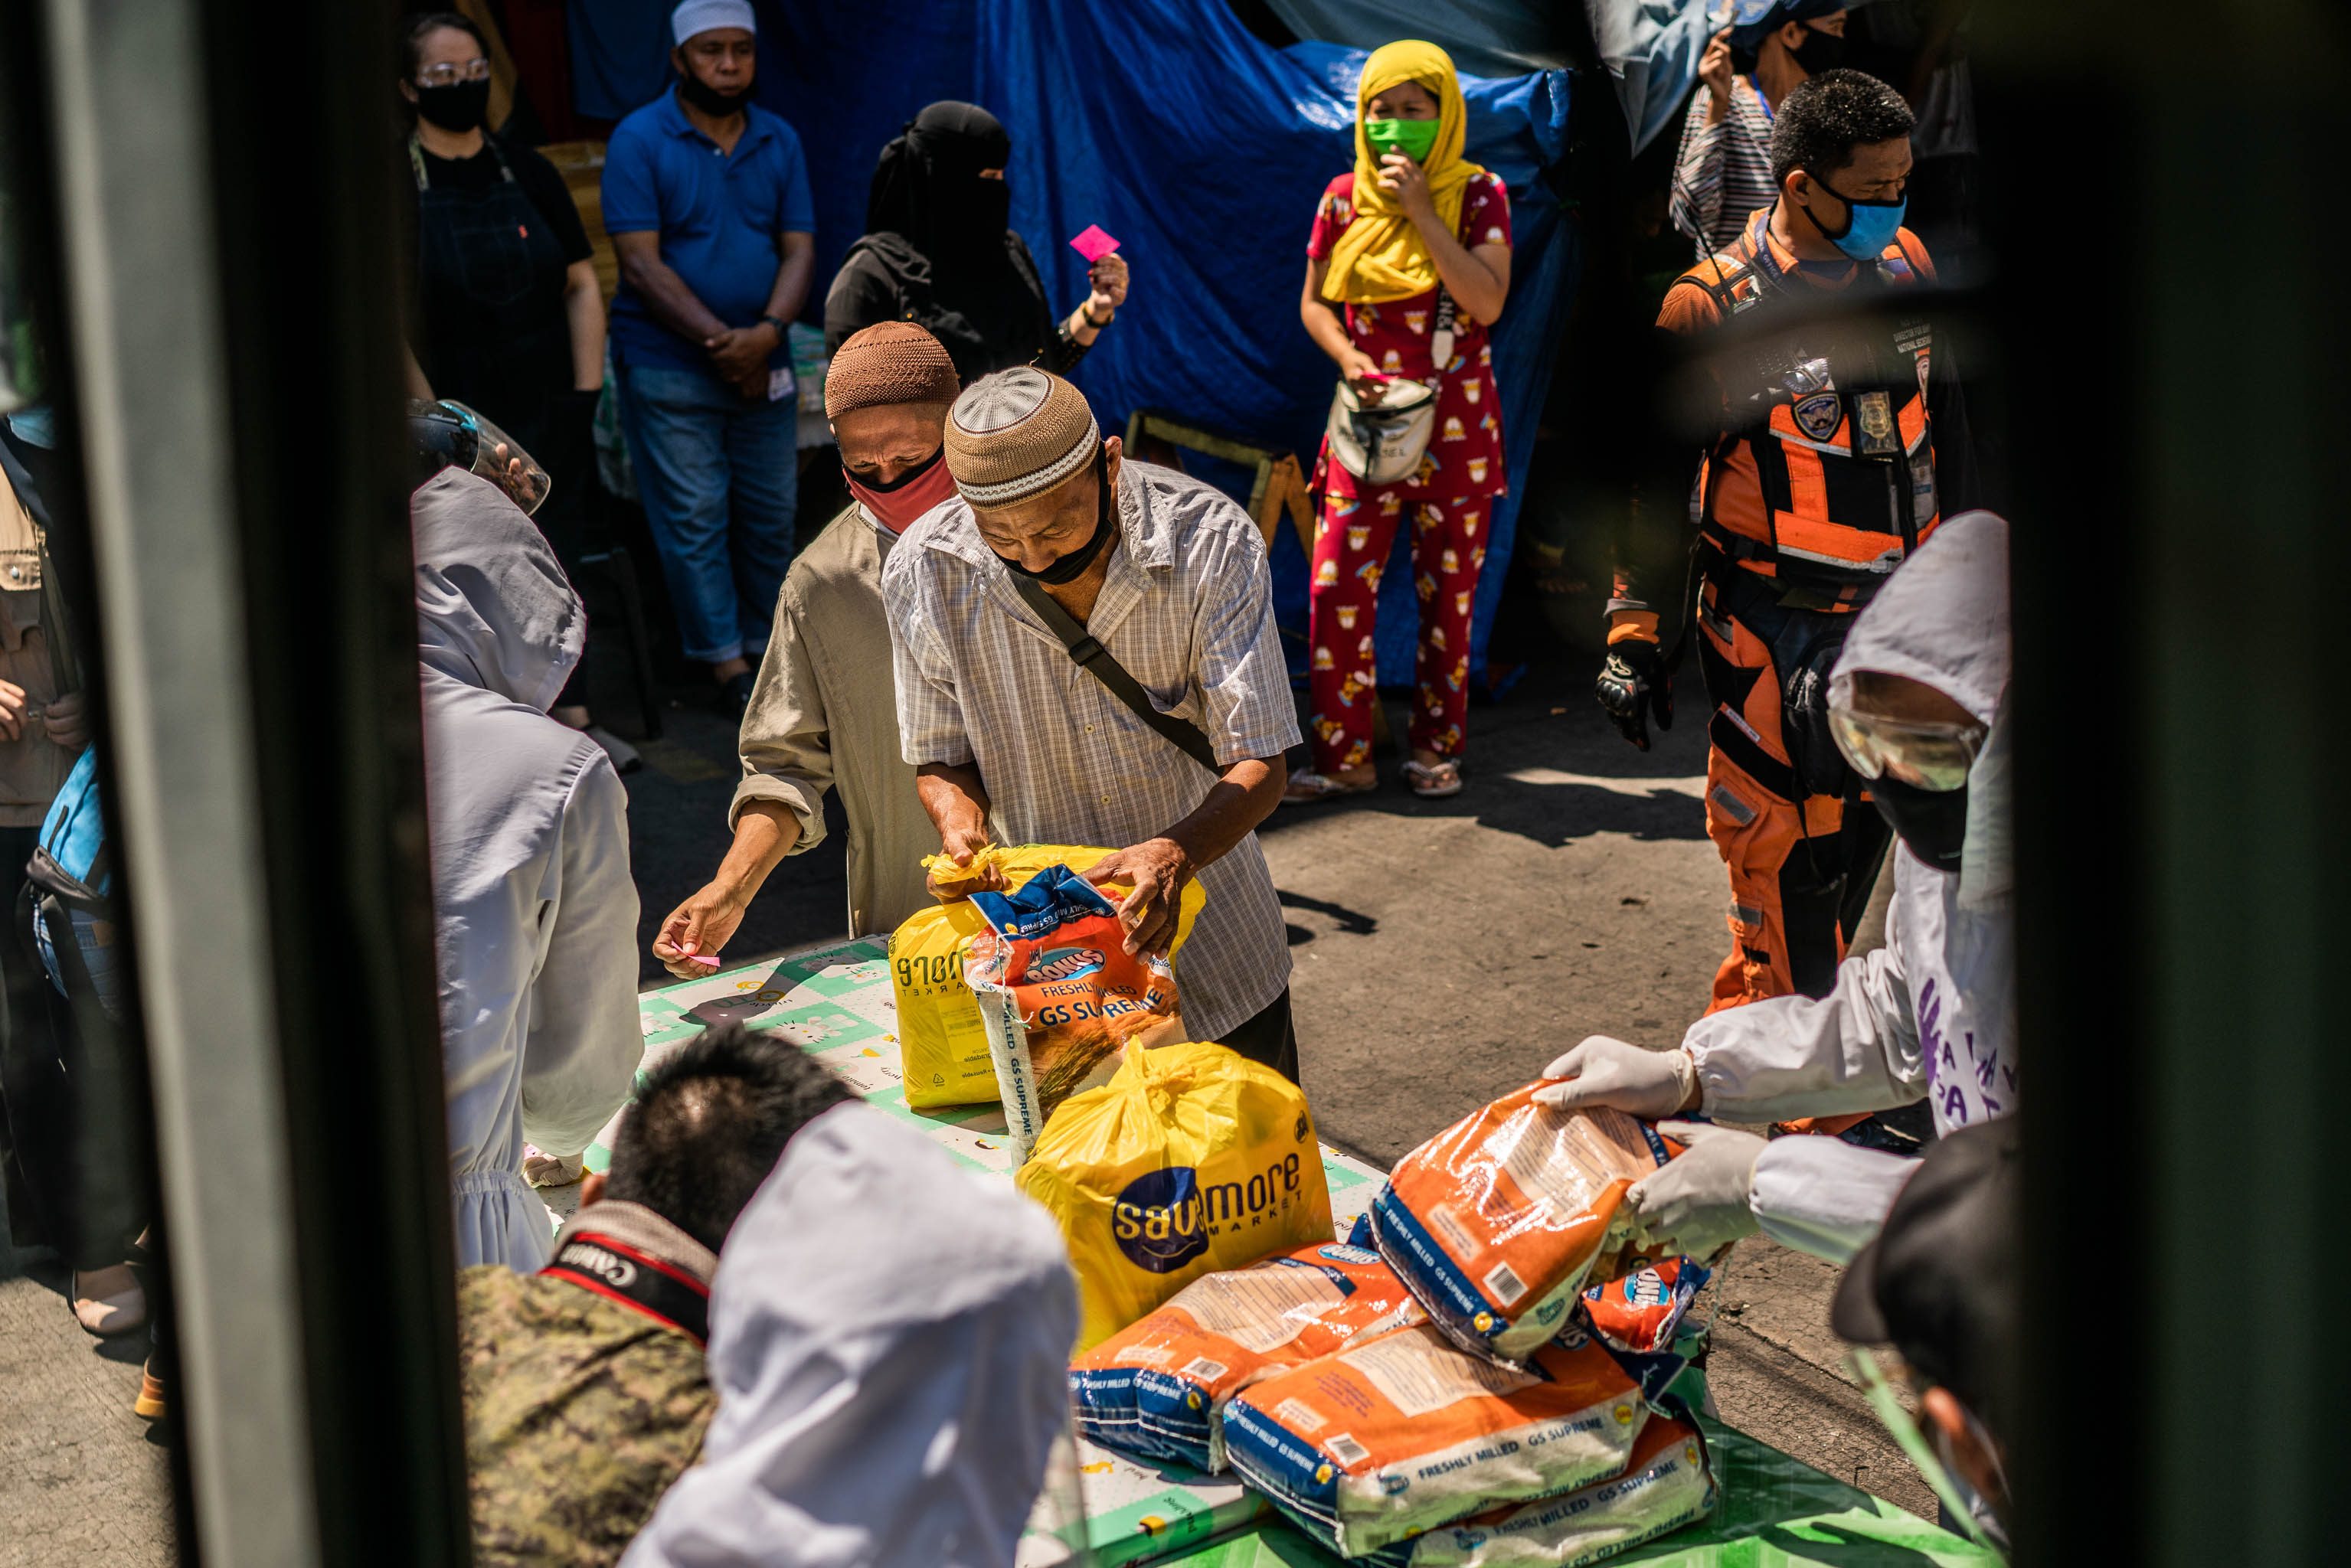 RELIEF EFFORT. Families line up for relief goods being distributed in an event facilitated by Tajannah Basman on May 19, 2020, in Quiapo, Manila.   